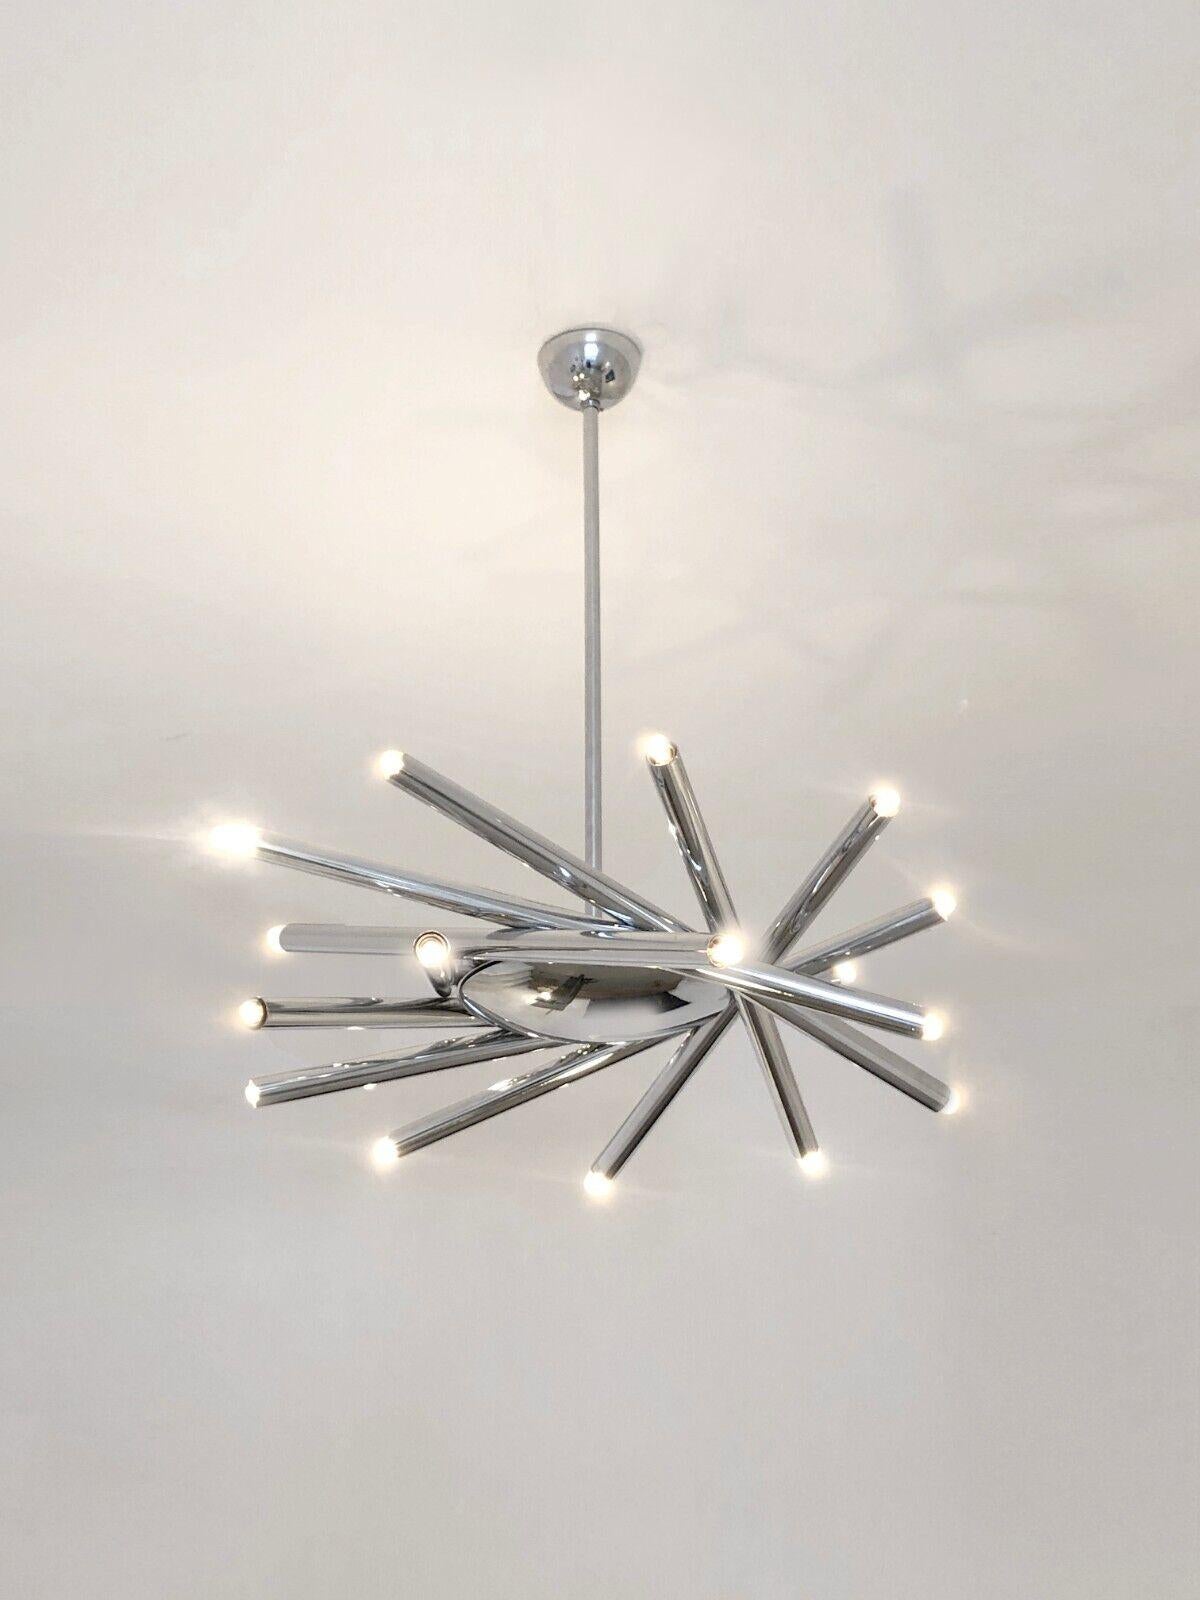 A spectacular 18-light pendant light, Radical, Post-Modernist, Space-Age, circular body surrounded by 9 long tubes or adjustable arms in chrome-plated metal with 2 lights each, the whole suspended spaceship style on a vertical axis with a spherical